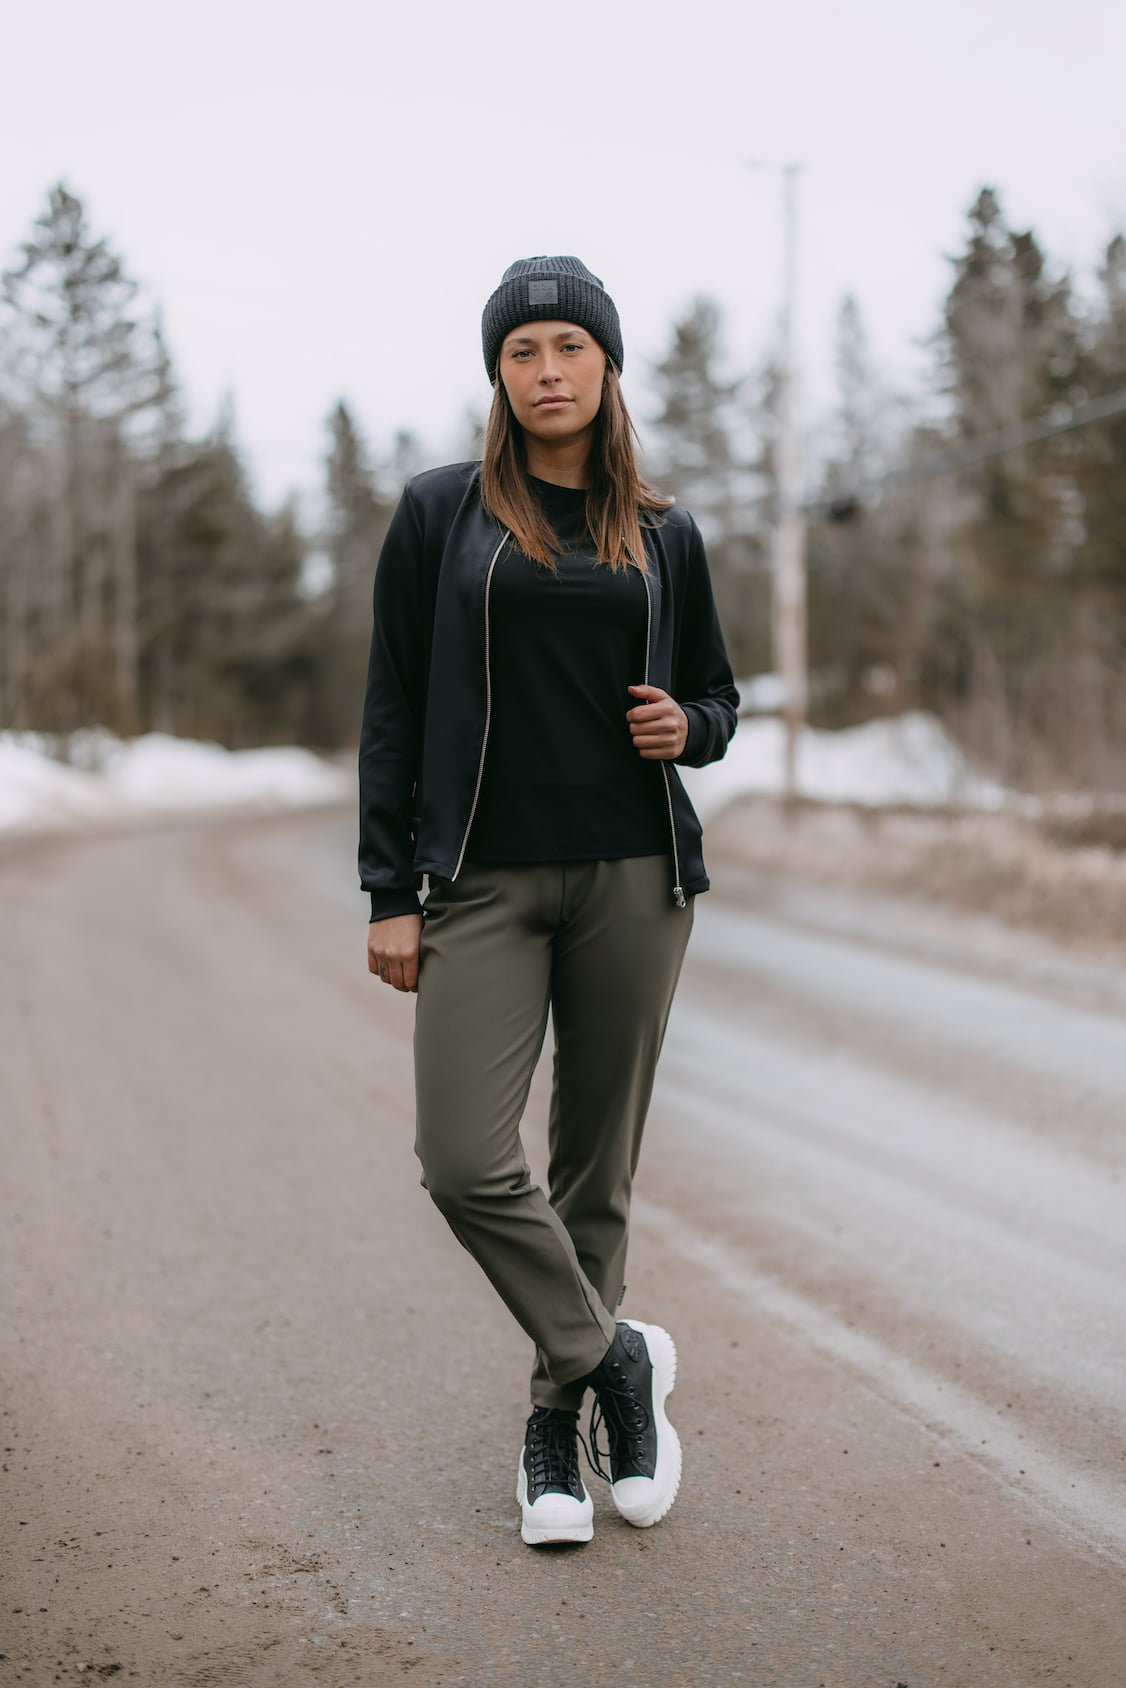 ORAKI  Clothing from recycled materials made in Quebec – Oraki